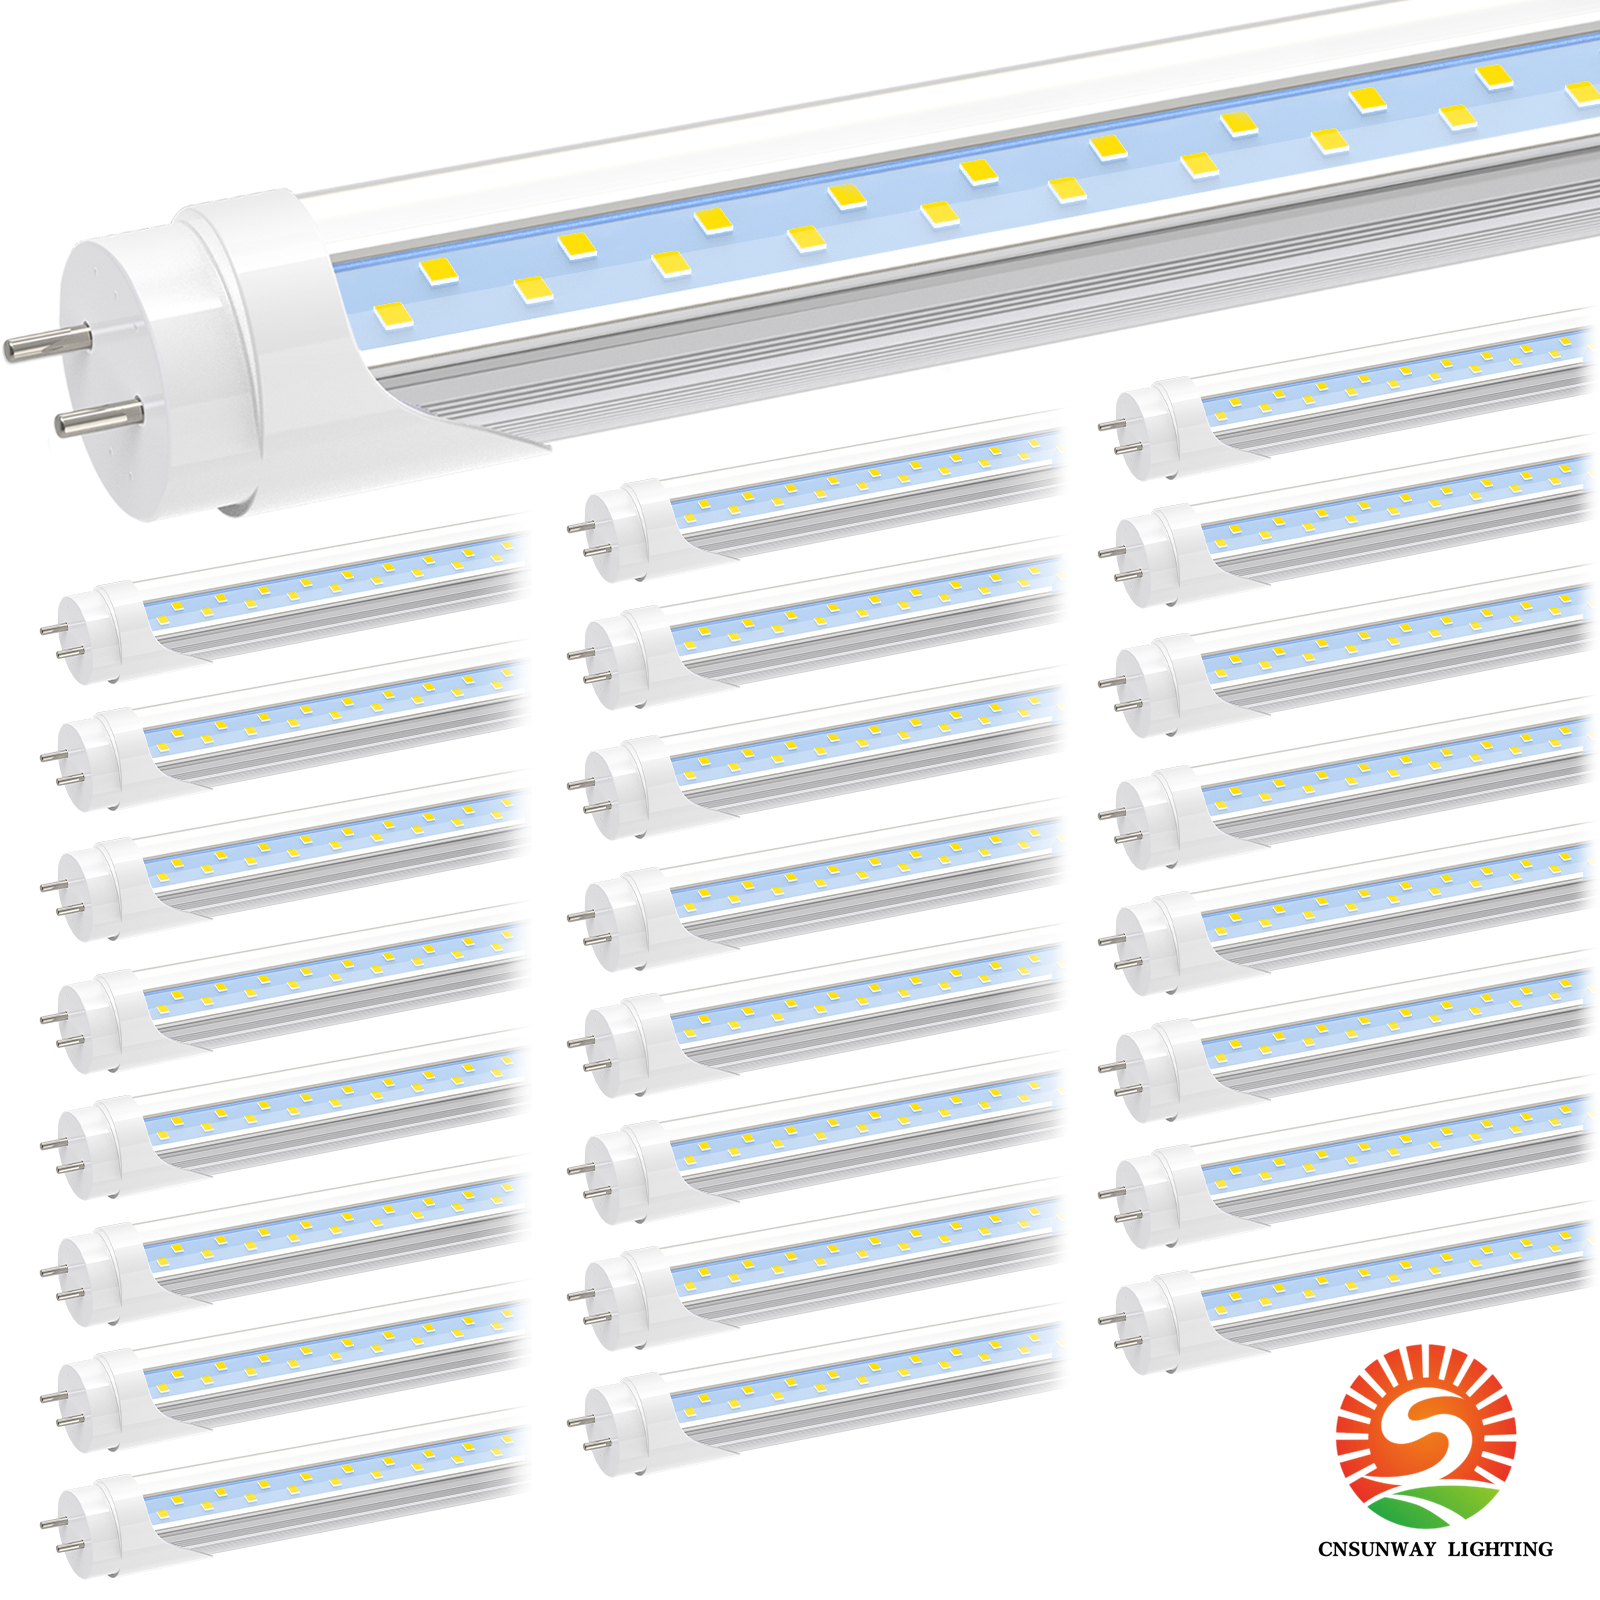 T8 4FT LED Tube Light Bulbs, 24W 6000K-6500K, 3000LM, 48 Inch LED Replacement for Flourescent Tubes, Remove Ballast, Dual-end Powered, Clear, 4 Foot Garage Warehouse